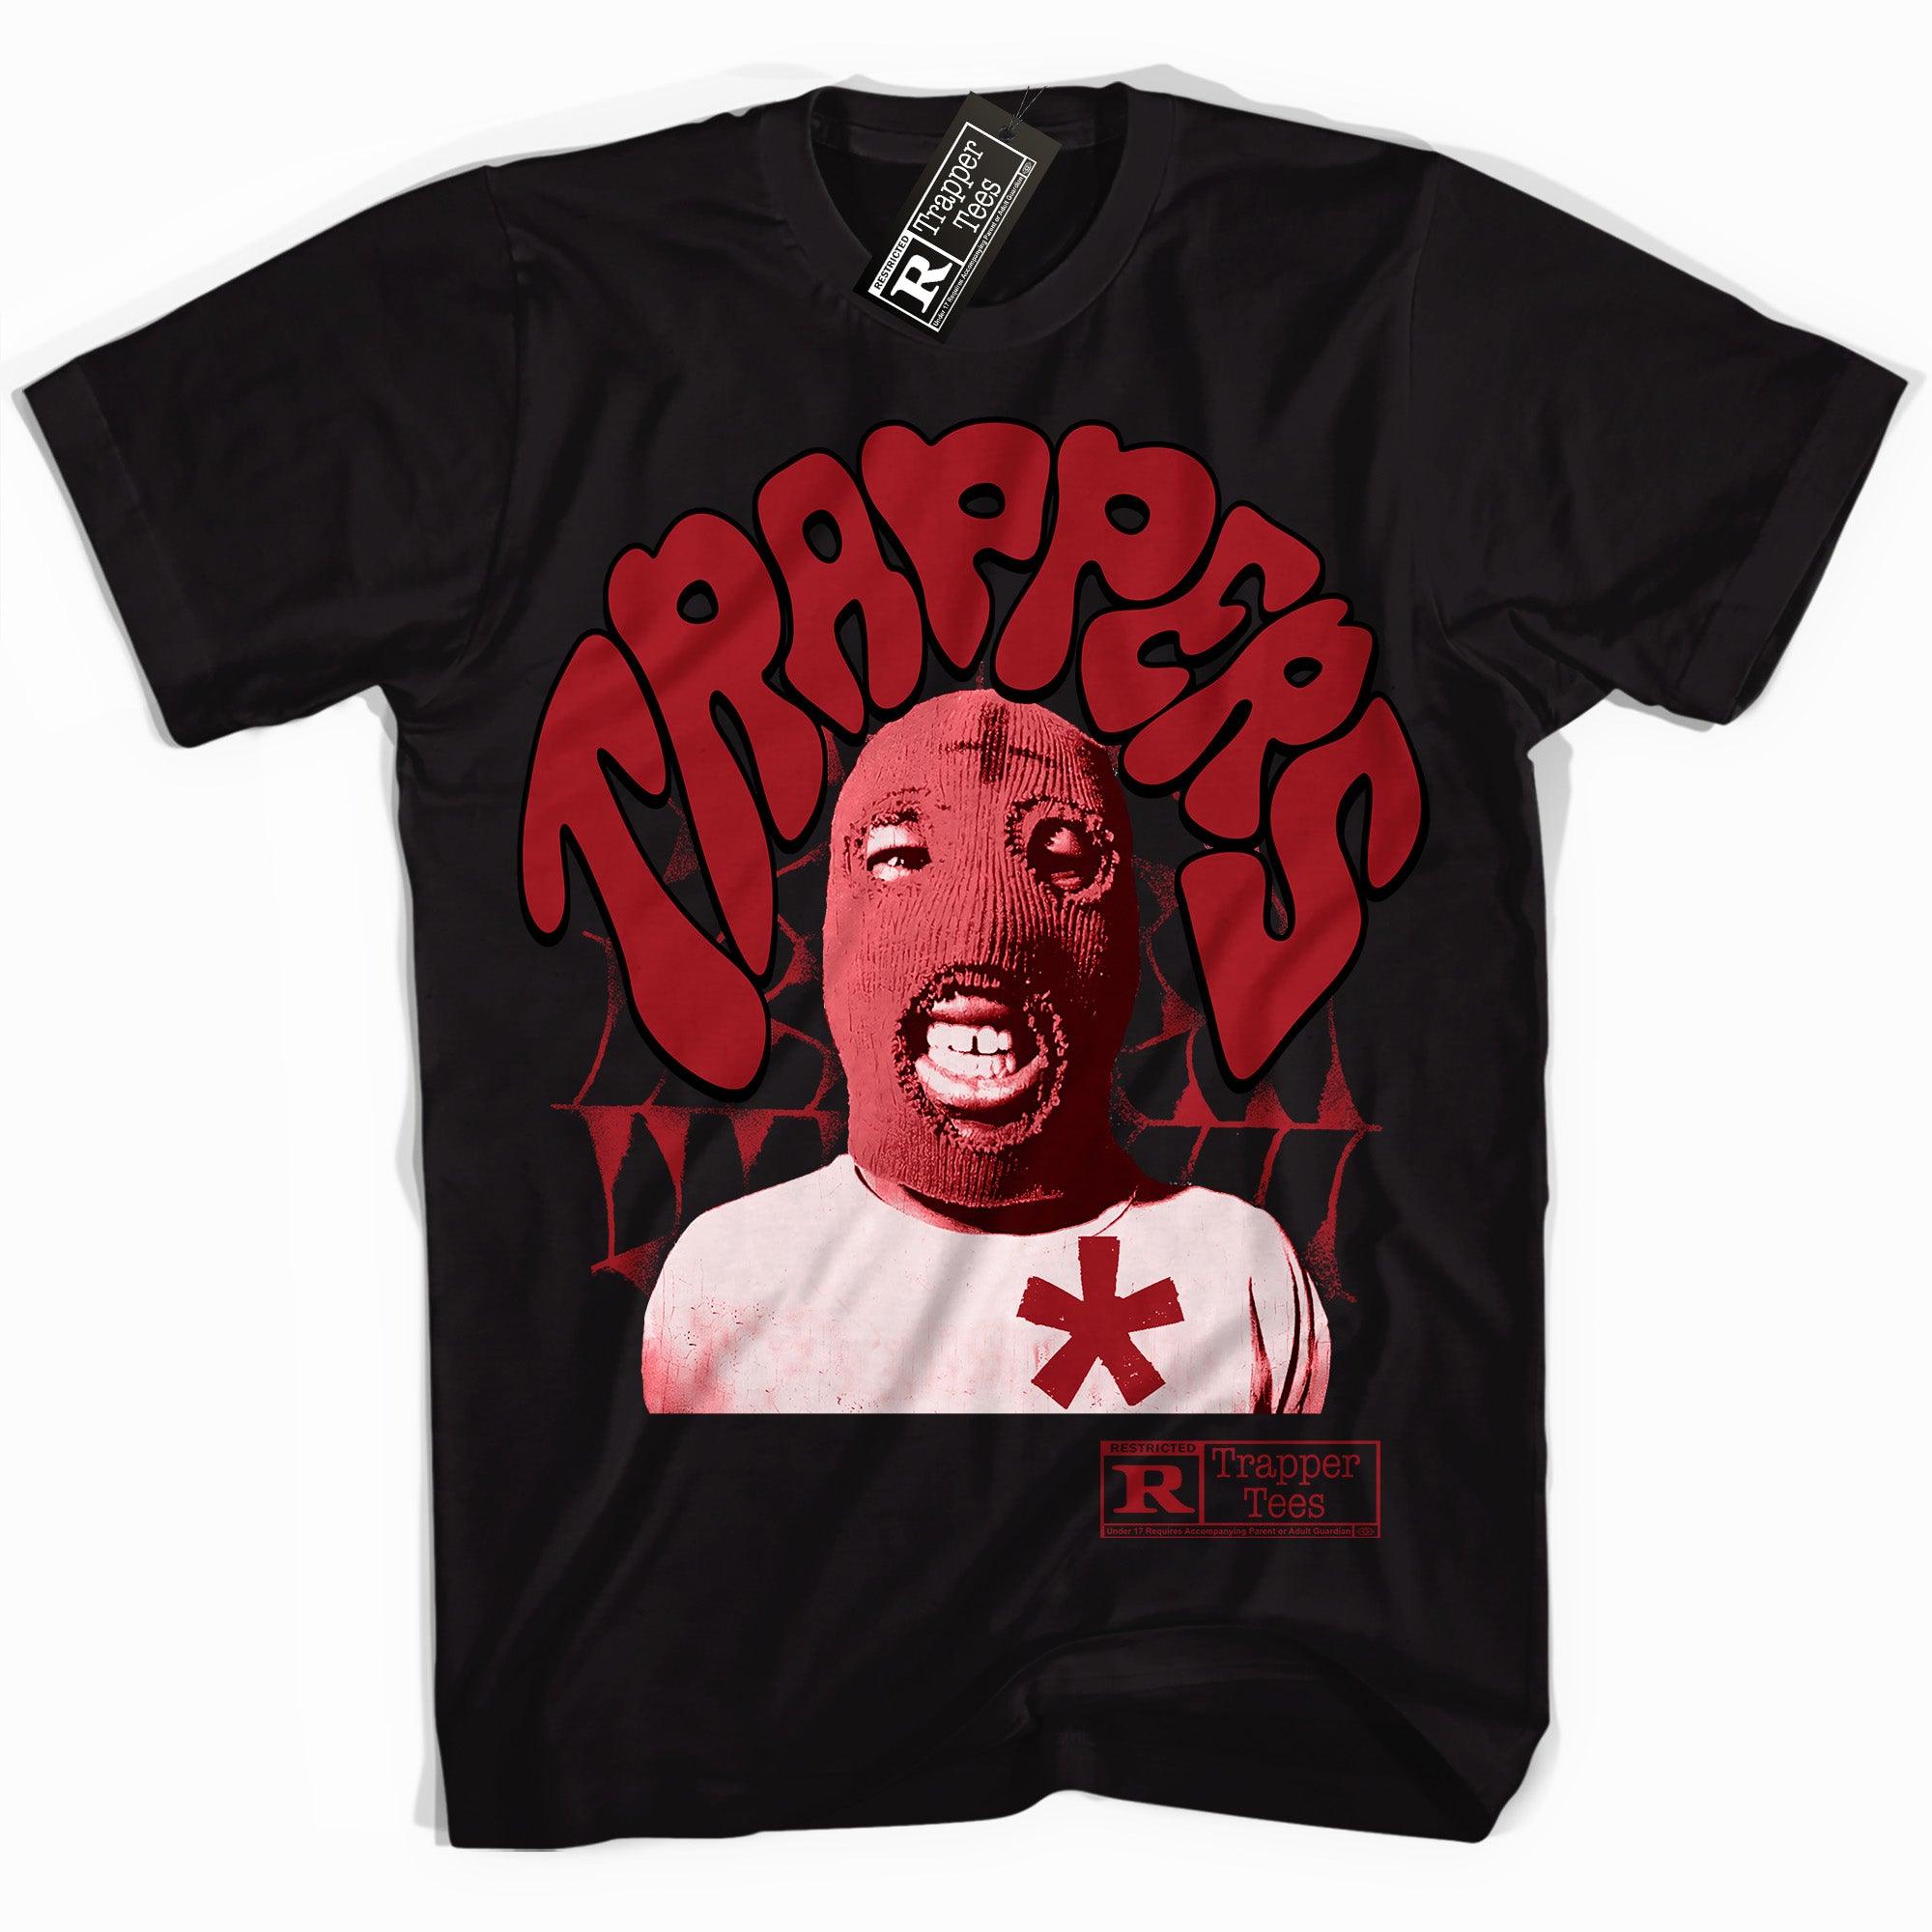 Cool Black graphic tee with “ Trapper Ski Mask ” print, that perfectly matches Air Jordan 12 Cherry sneakers 